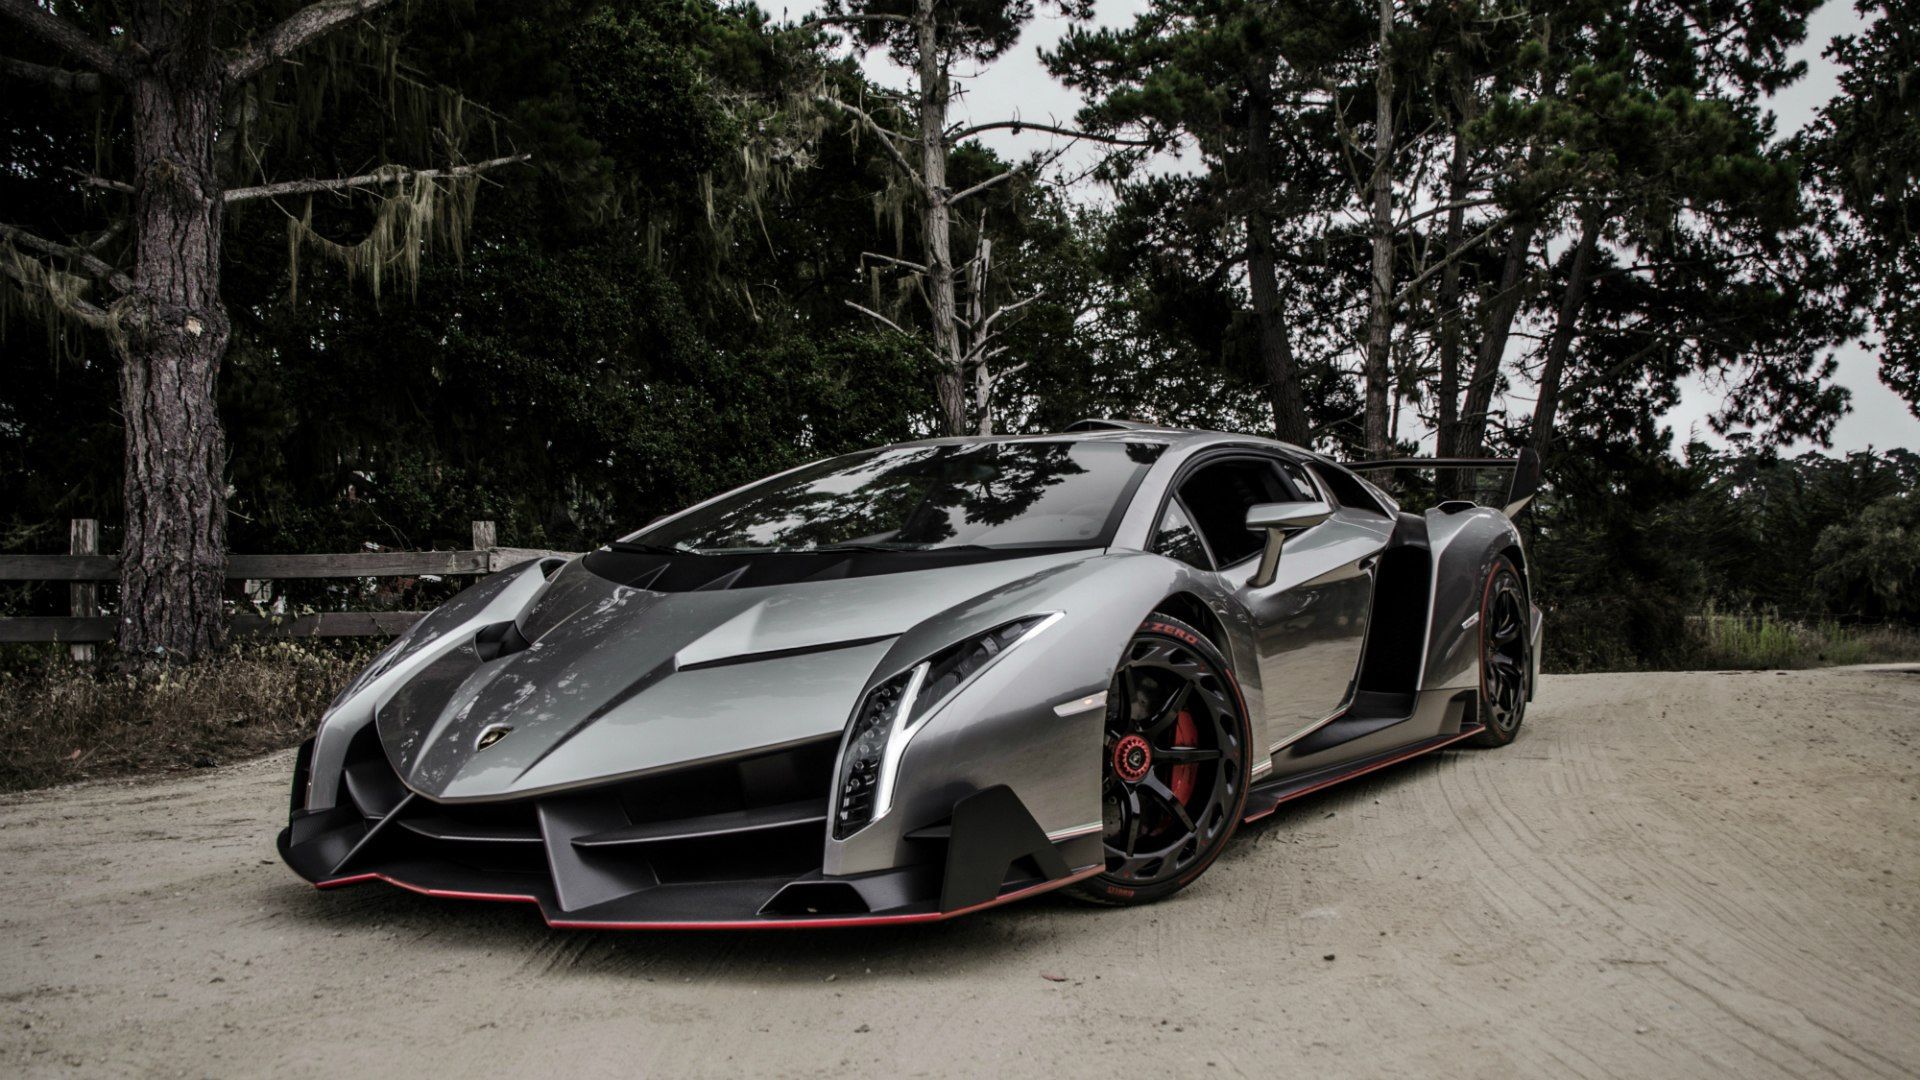 Vehicles for speed Lamborghini Veneno wallpapers and images ...